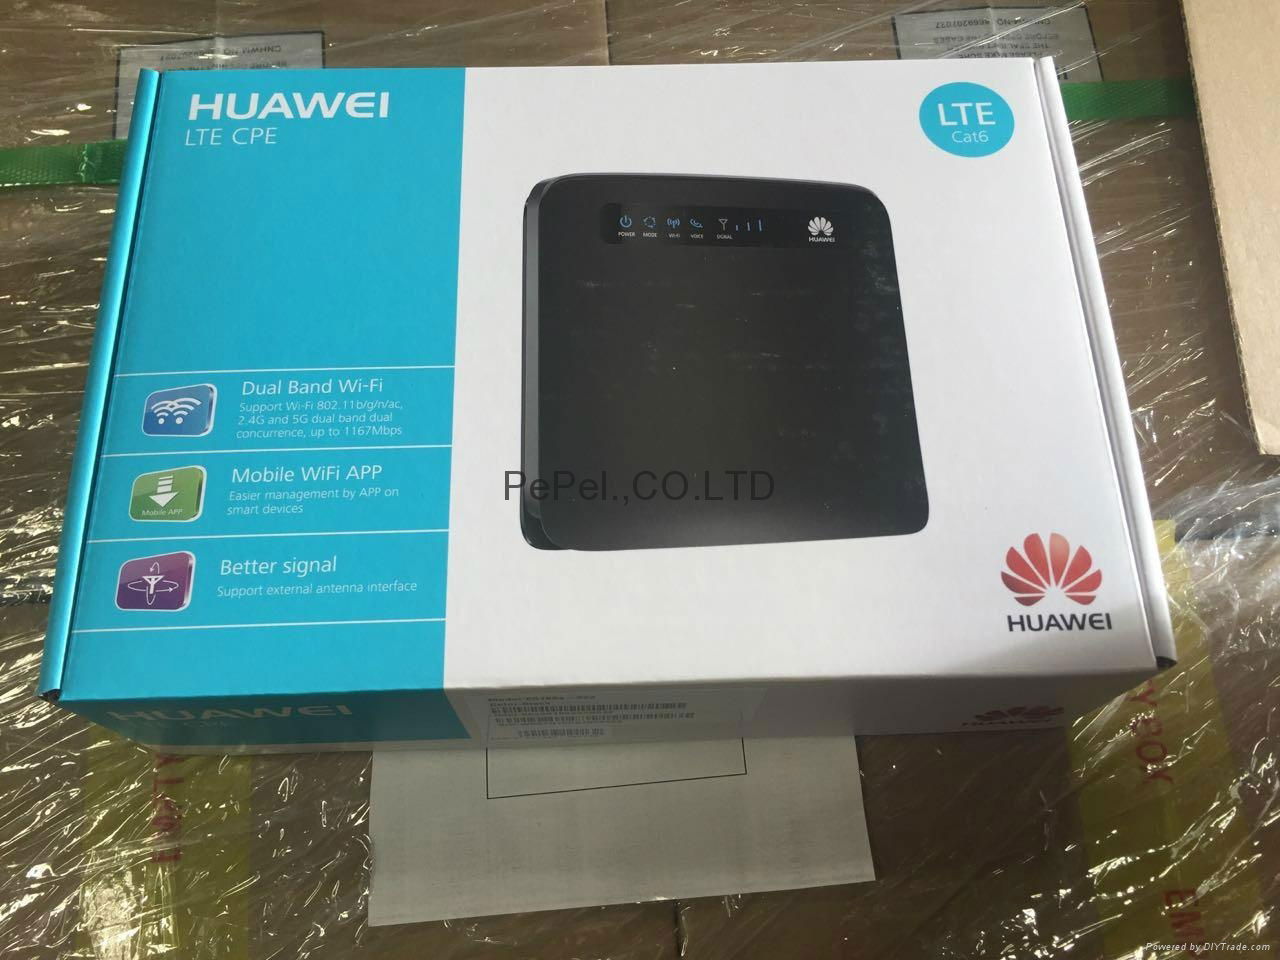 Huawei E5186s-22a LTE Cat6 300Mbps CPE Wireless Router (China Manufacturer)  - Network Communications Equipment - Telecommunication &